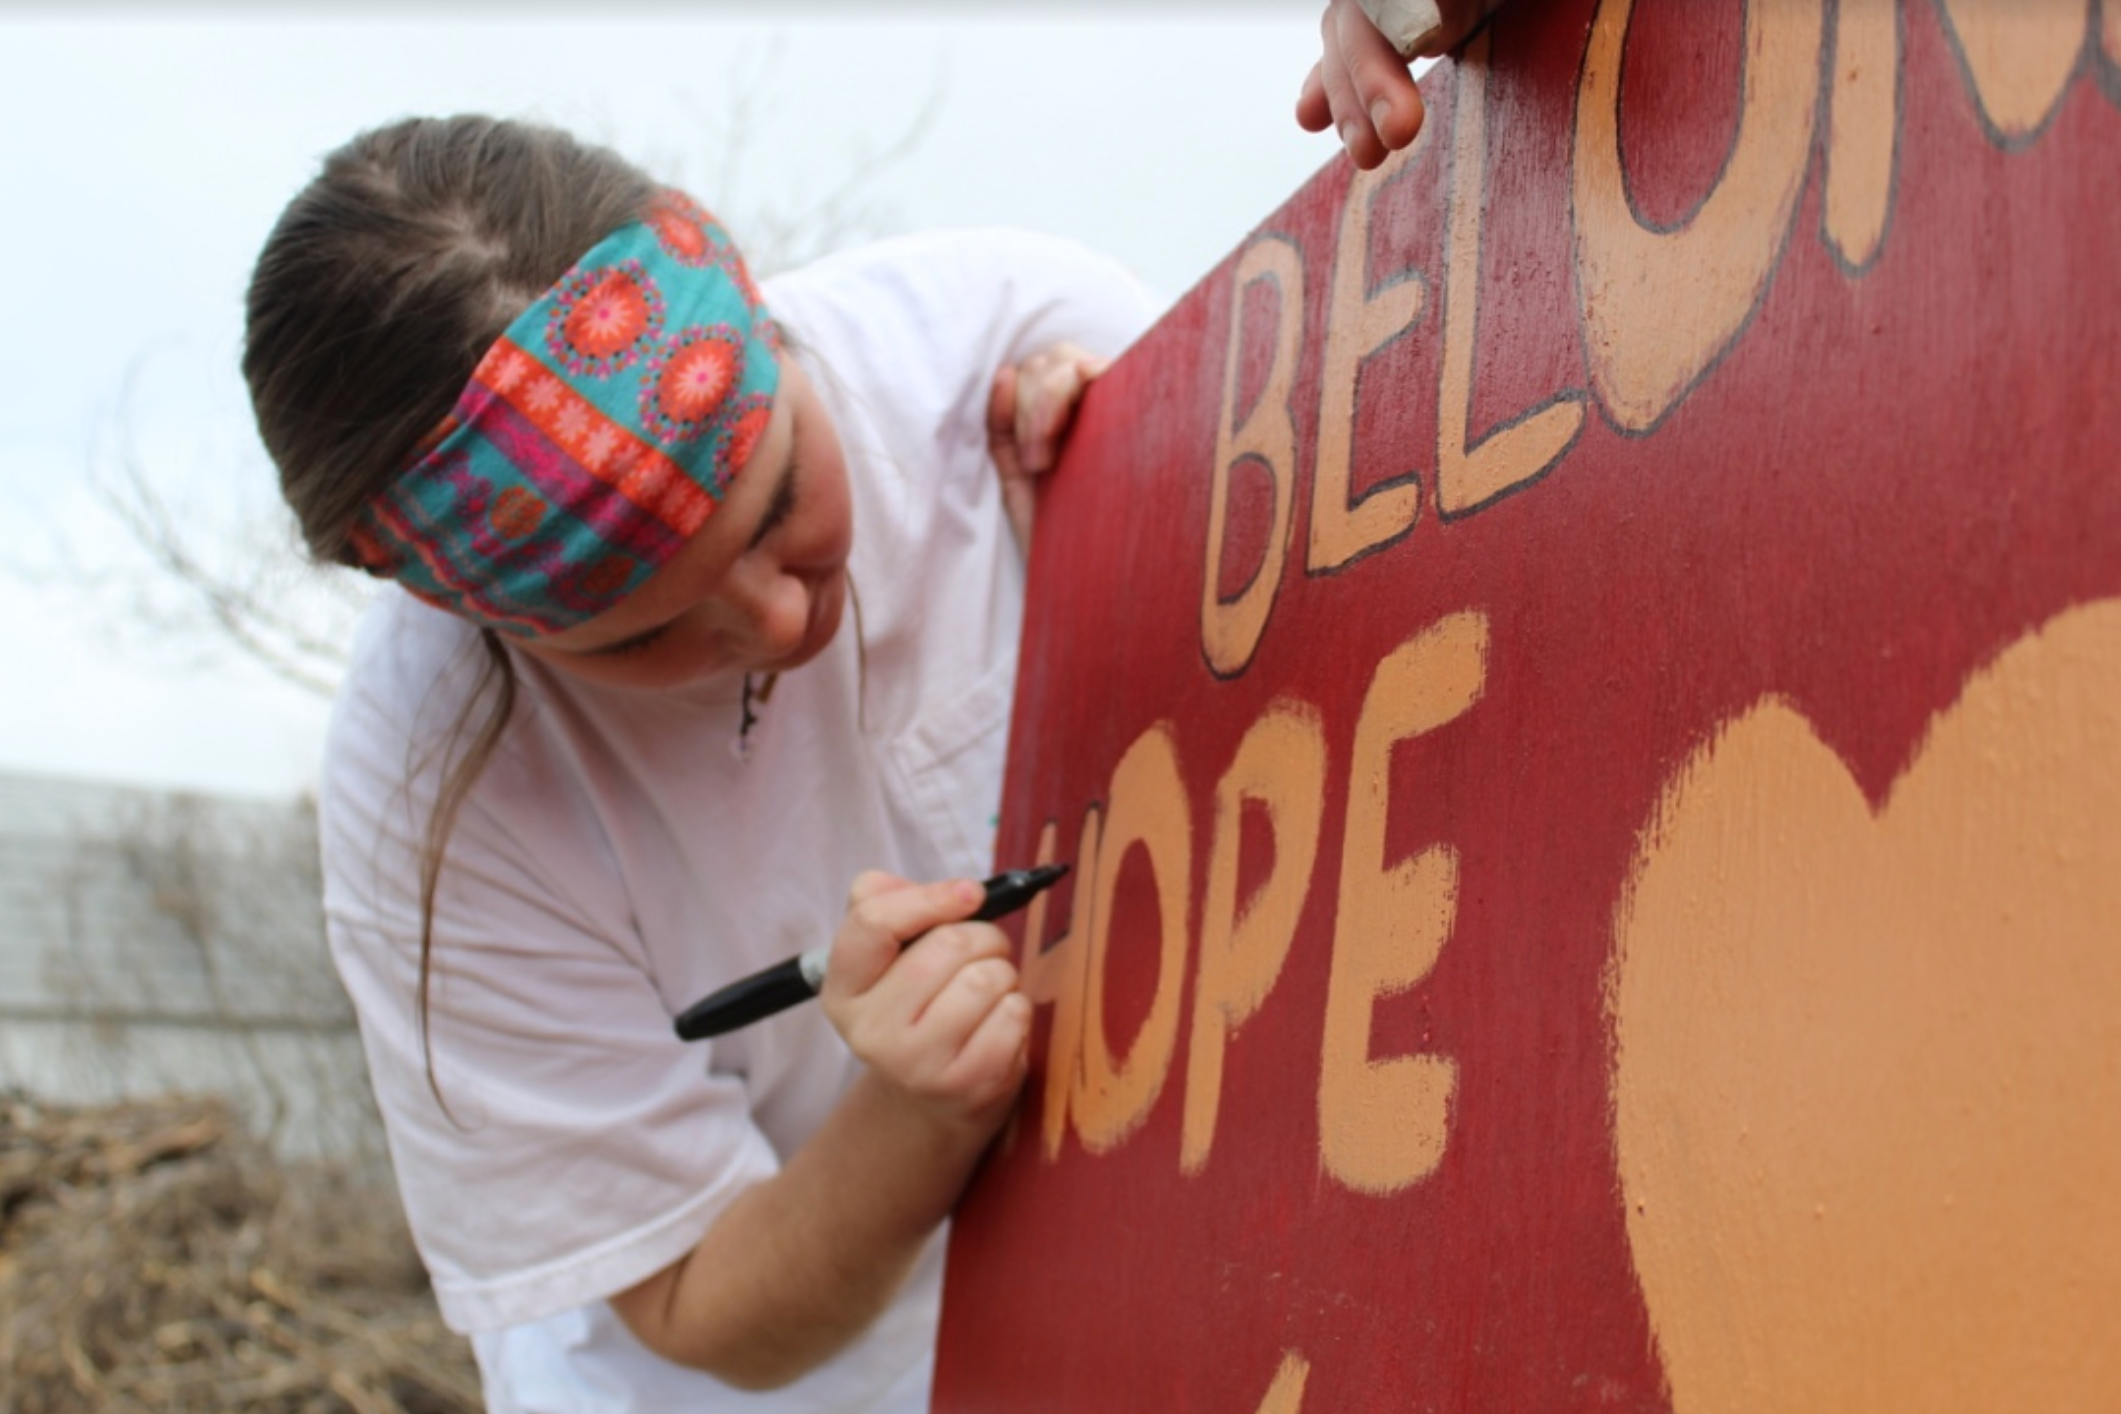 Kate Price paints a sign